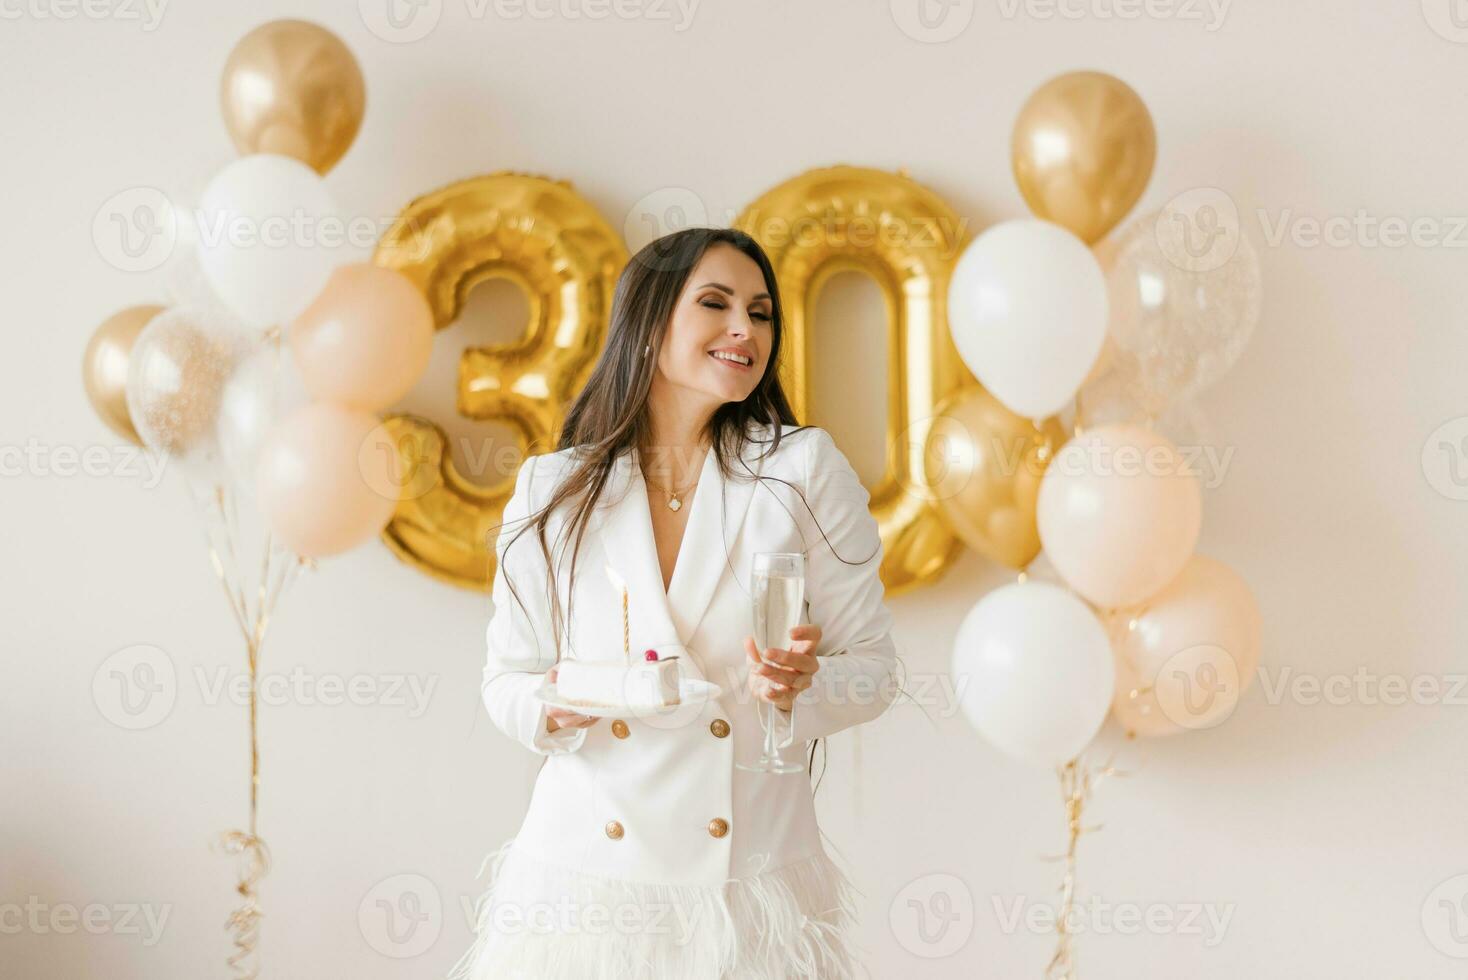 Positive woman celebrating anniversary dressed in stylish feather dress makes a wish with birthday candle cake around inflated balloons at home photo